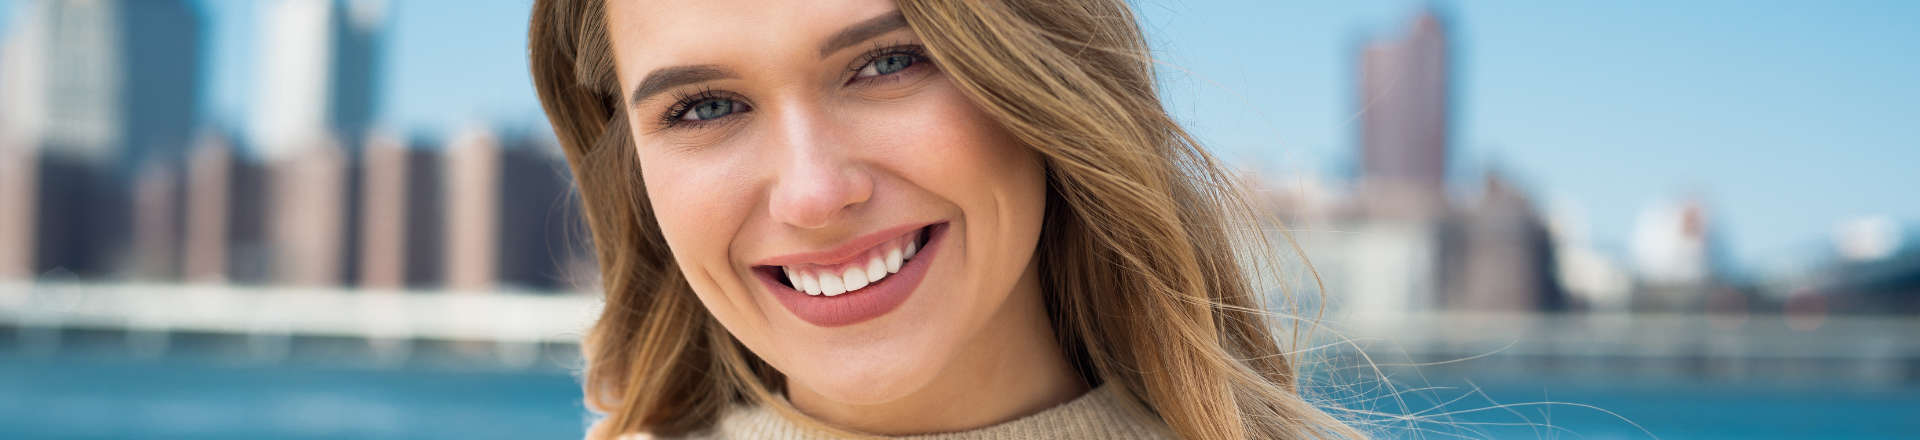 cheerful young woman showing teeth in smile